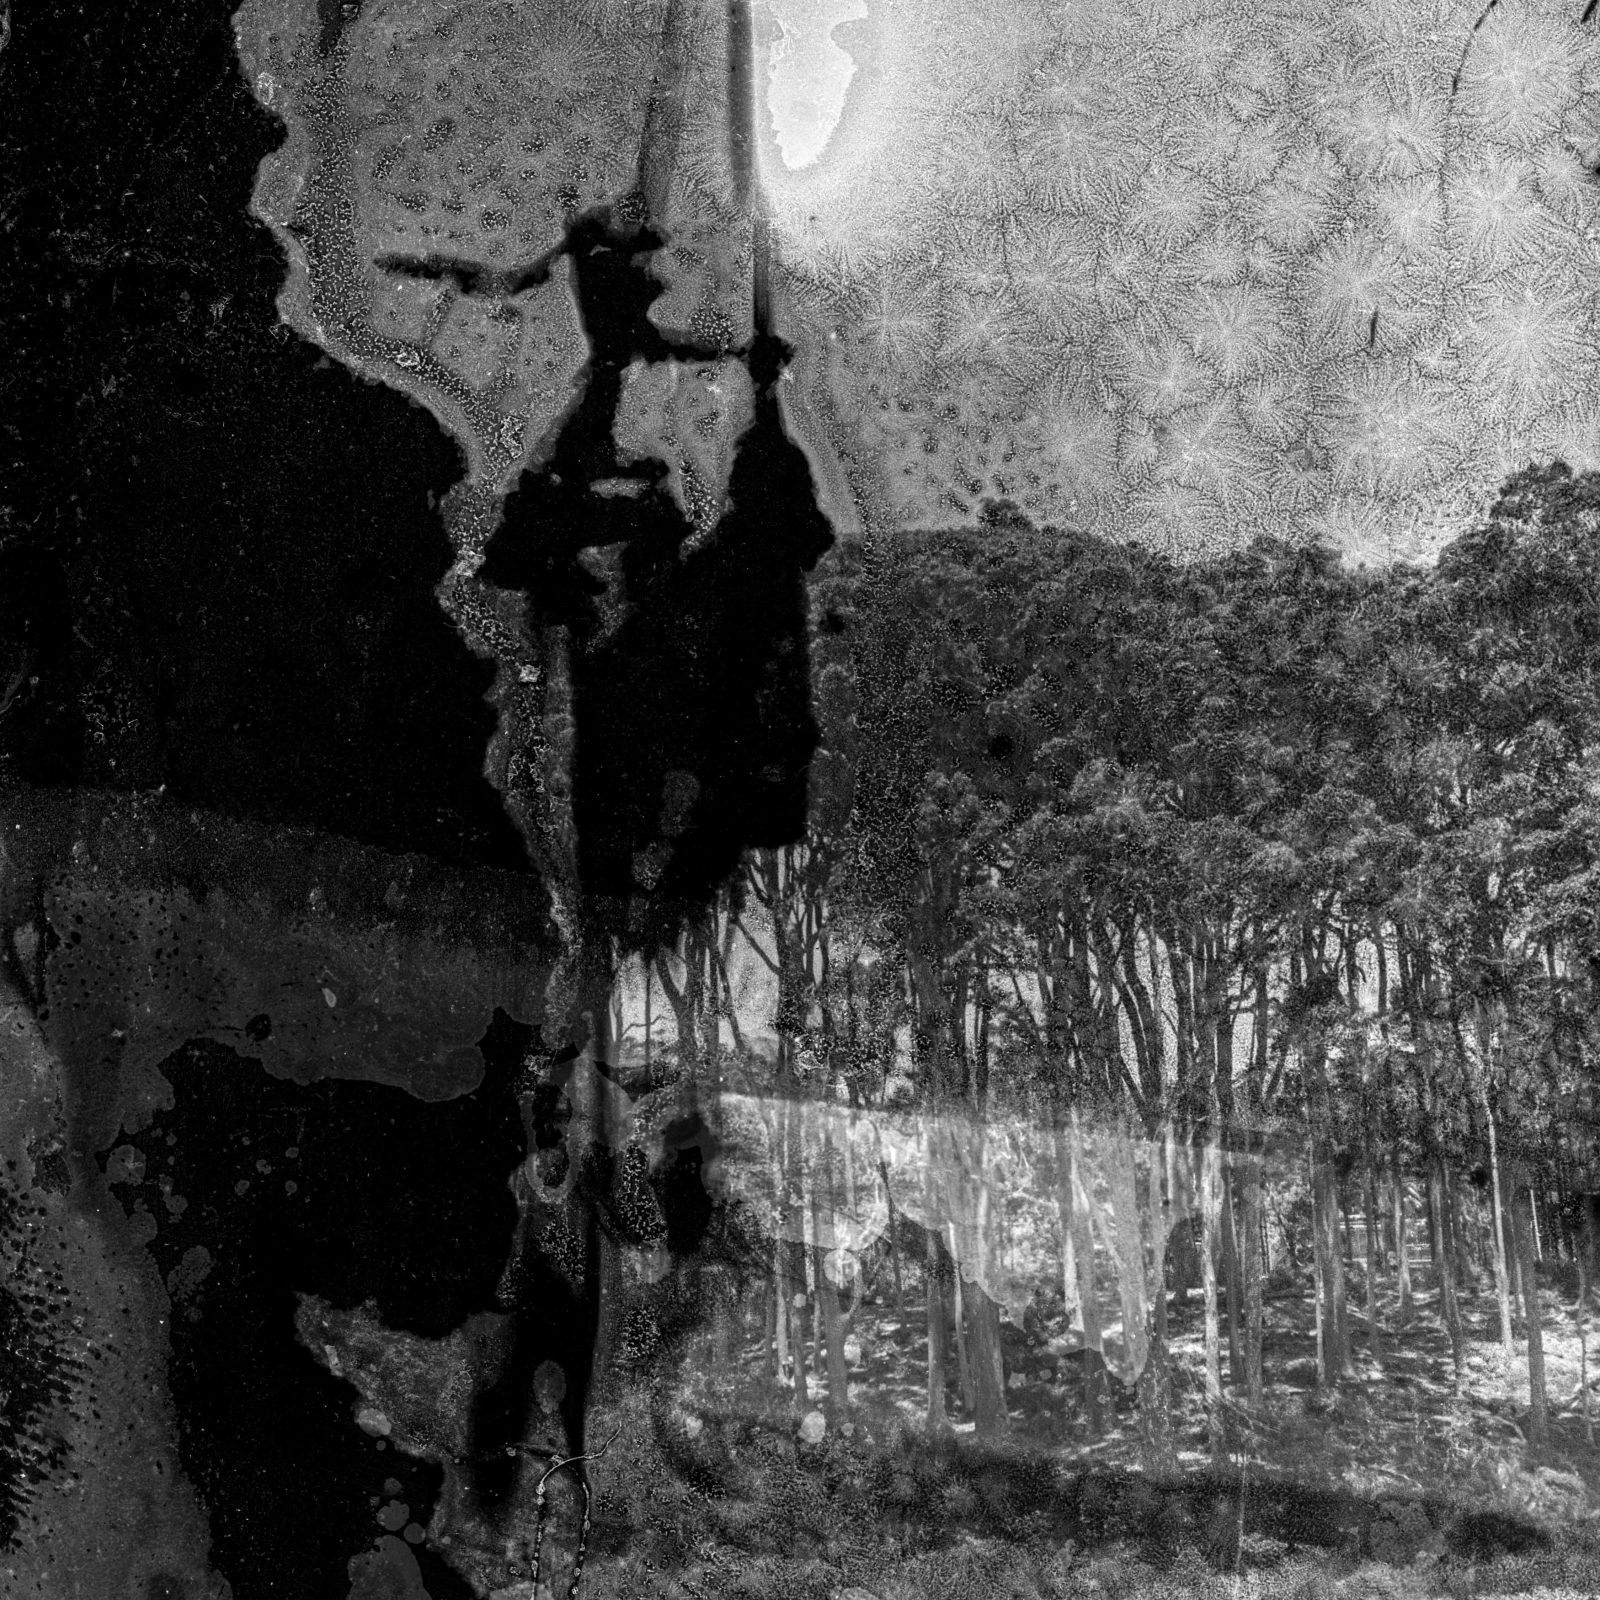 Sammy Hawker, Murramarang National Park #1, 2020.
Archival photographic print from 6 x 6 negative processed with ocean water and hailstones.